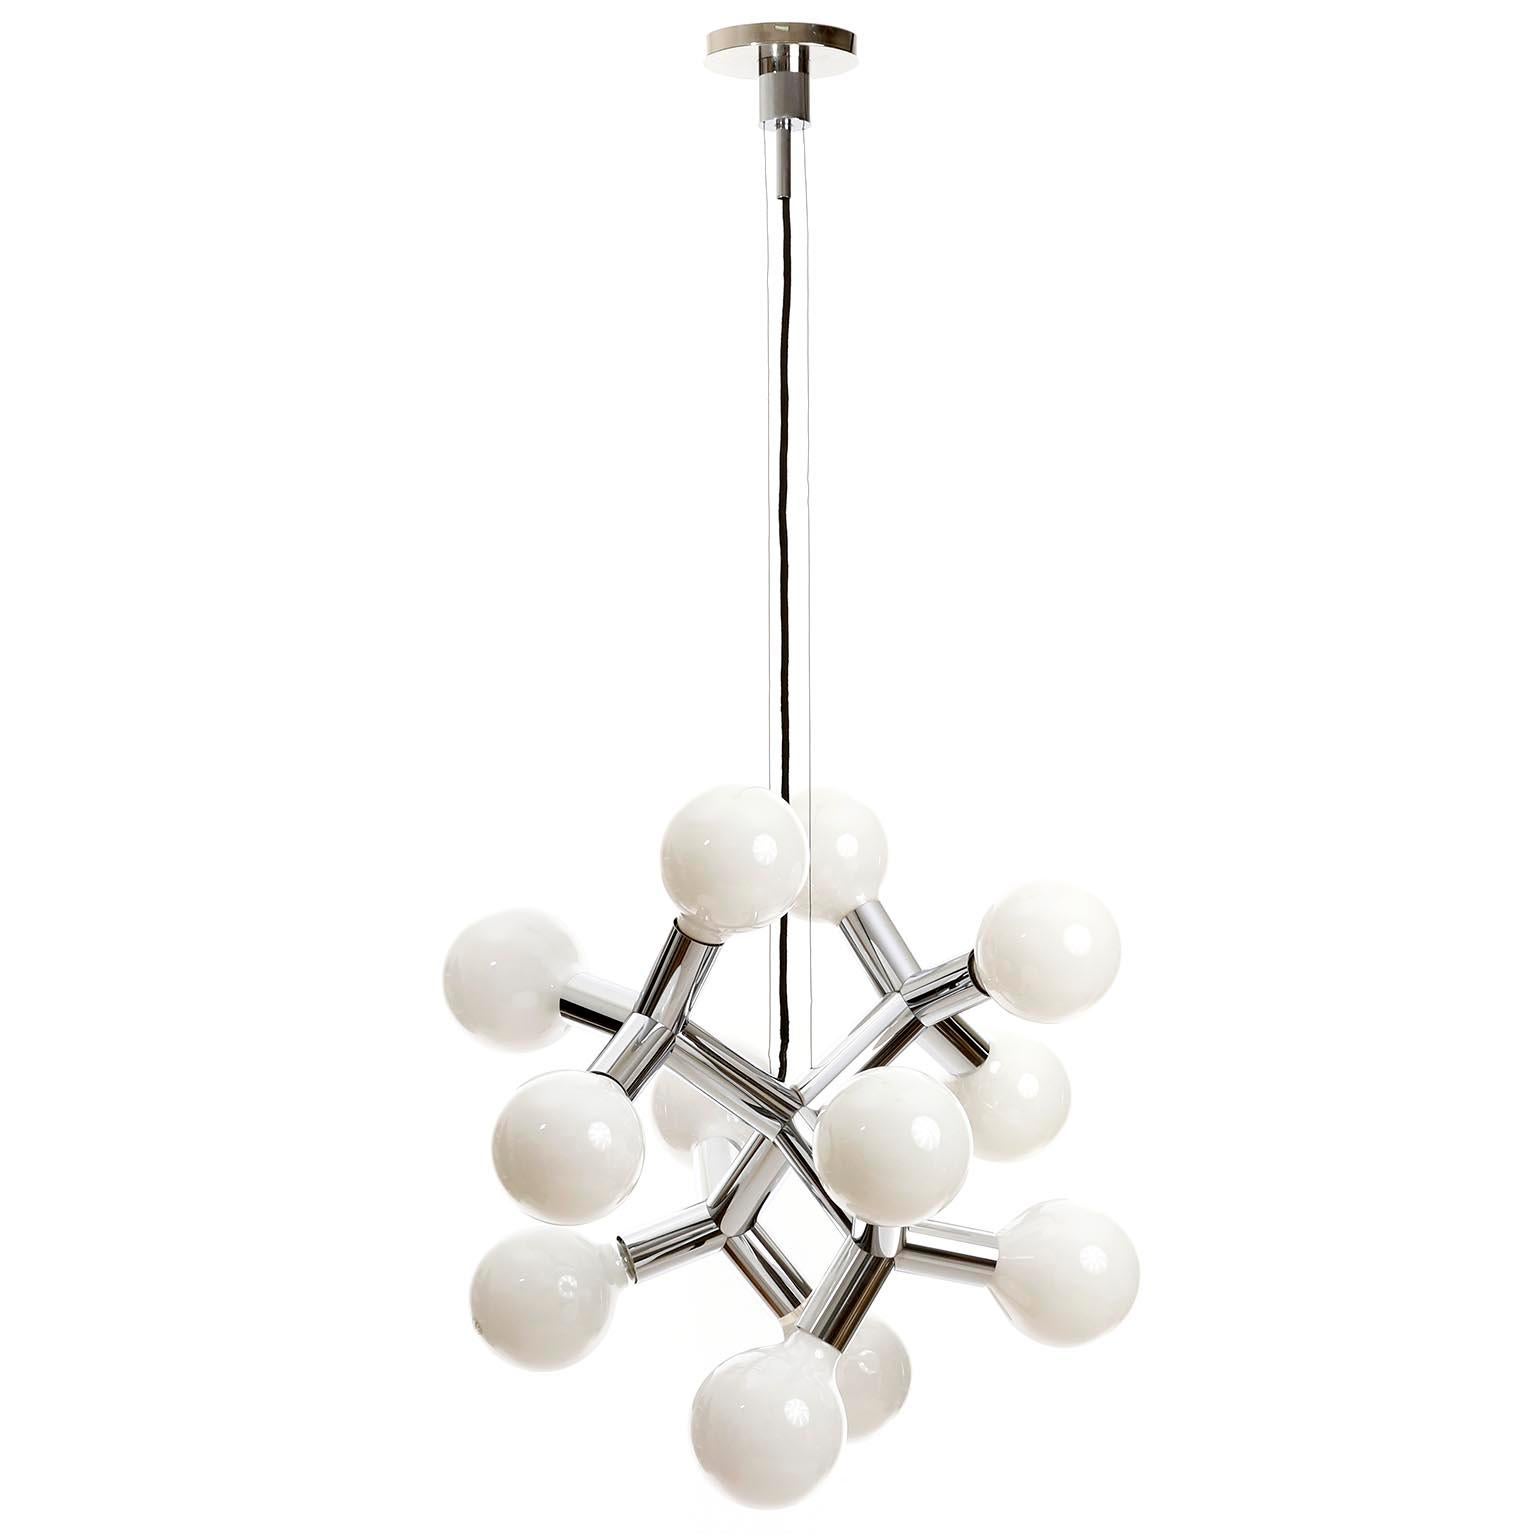 One of four 12-arm polished chrome atomic chandeliers or pendant lights model 'ATOMIC 12 HL' by J.T. Kalmar, Austria, manufactured in midcentury, circa 1970 (late 1960s or early 1970s).  
Each chandelier has 12 sockets for medium or standard Edison